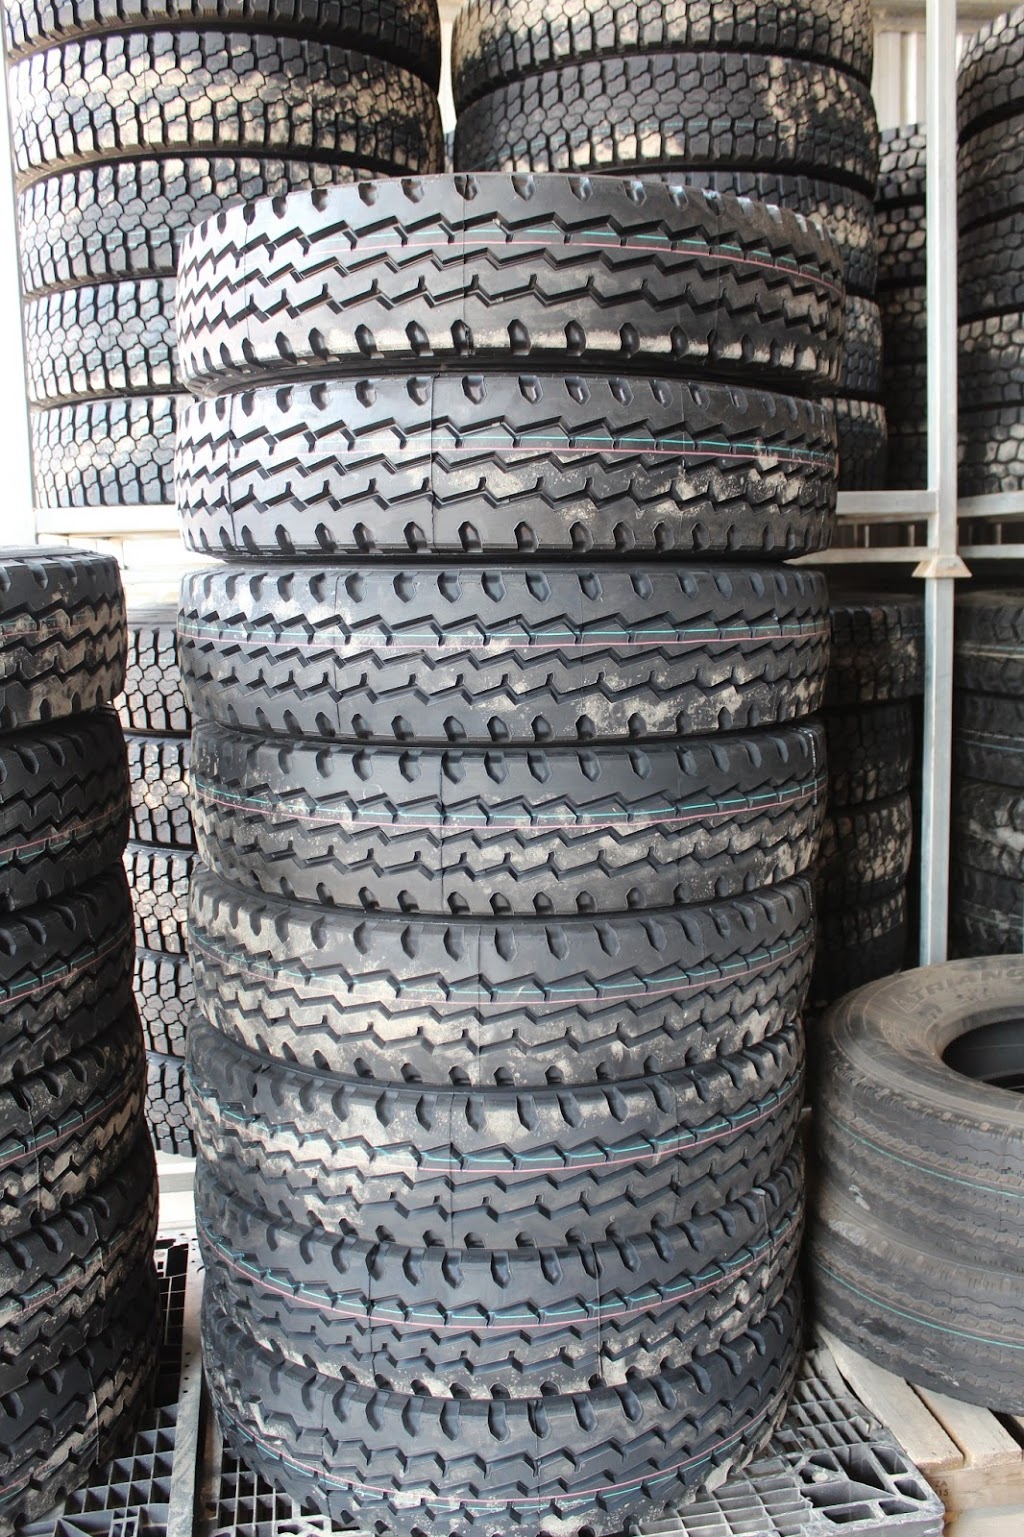 Direct Wholesale Tyres | car repair | 29-33 Curley Circuit, Townsville QLD 4811, Australia | 0747781777 OR +61 7 4778 1777